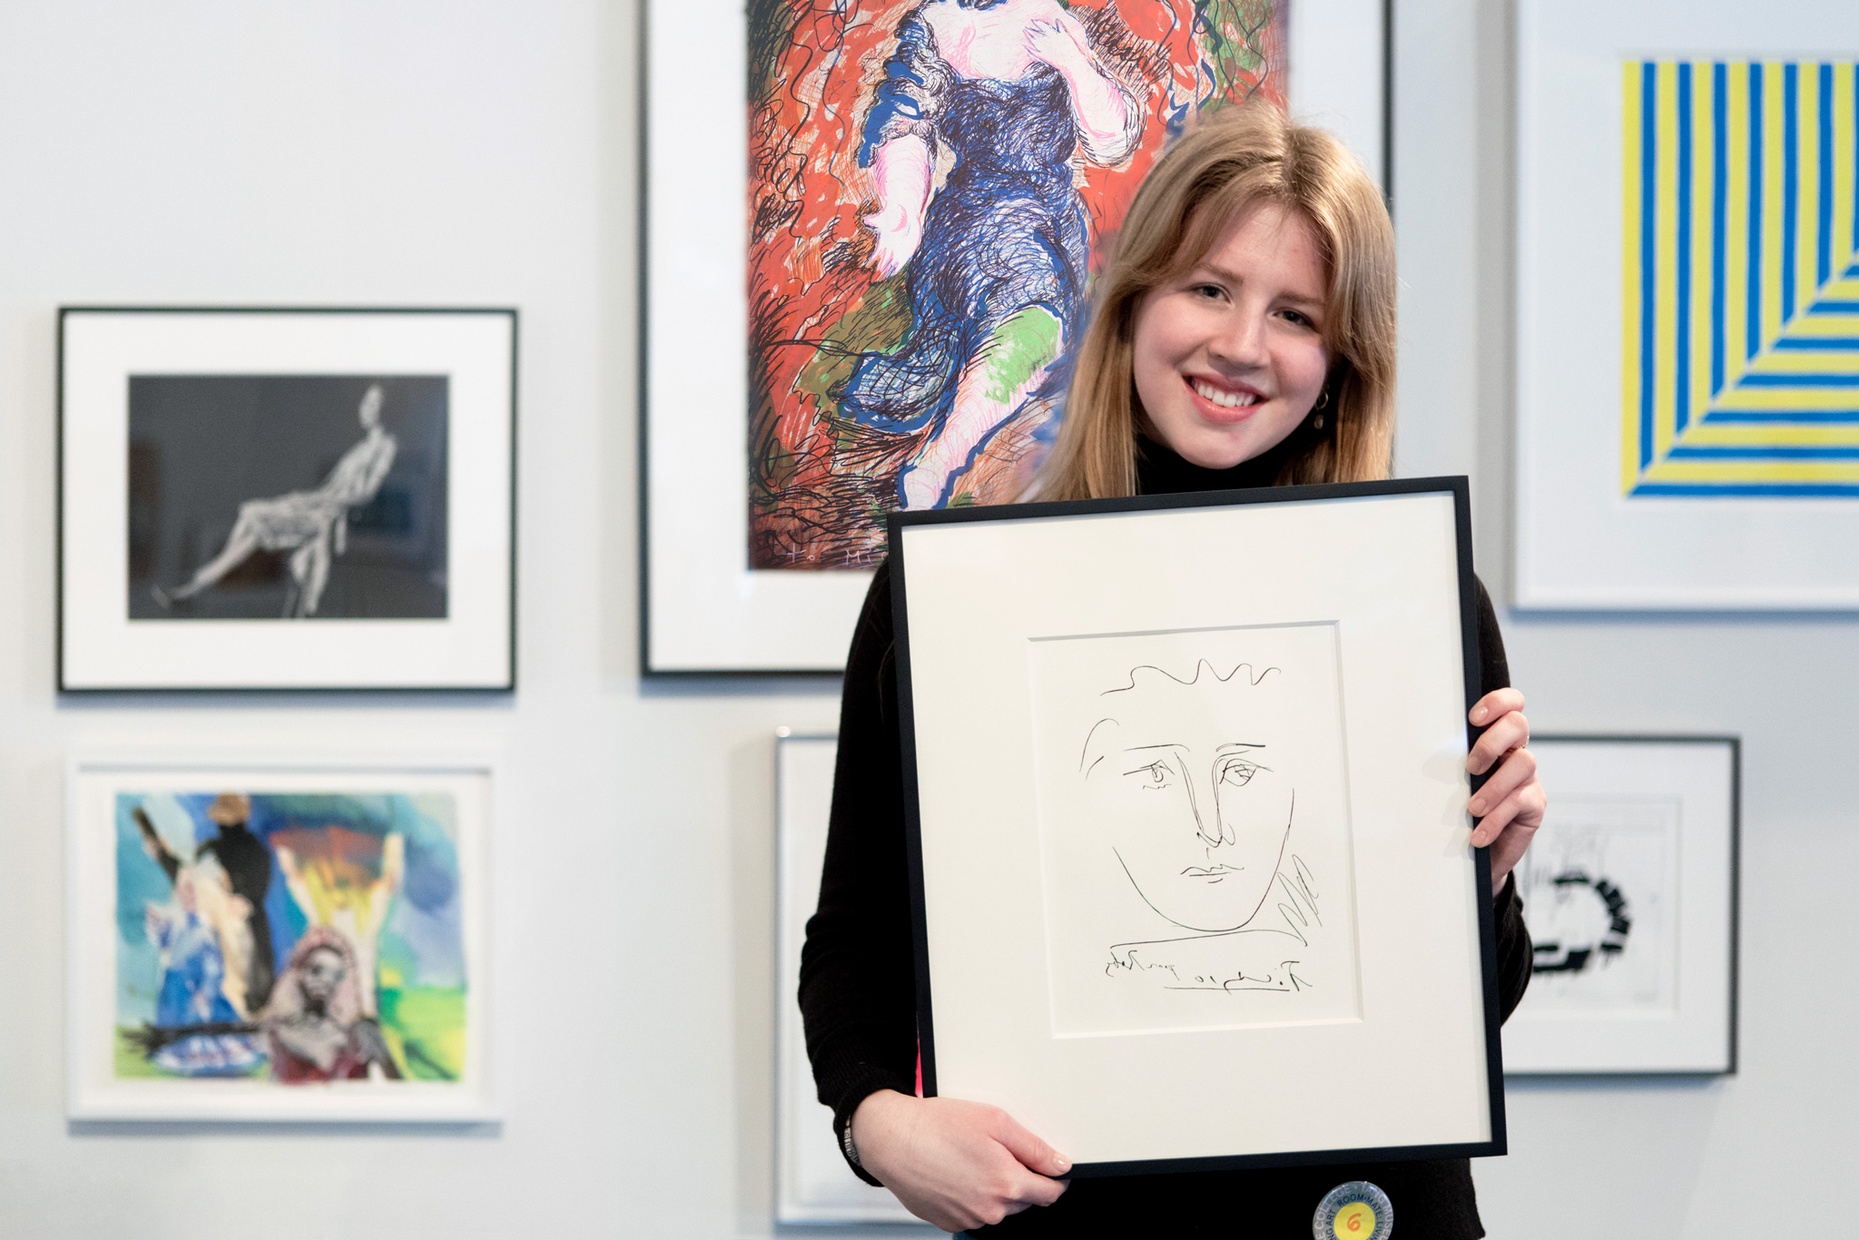 A woman is smiling holding a framed print by Picasso, more framed artwork hangs on the wall behind her.